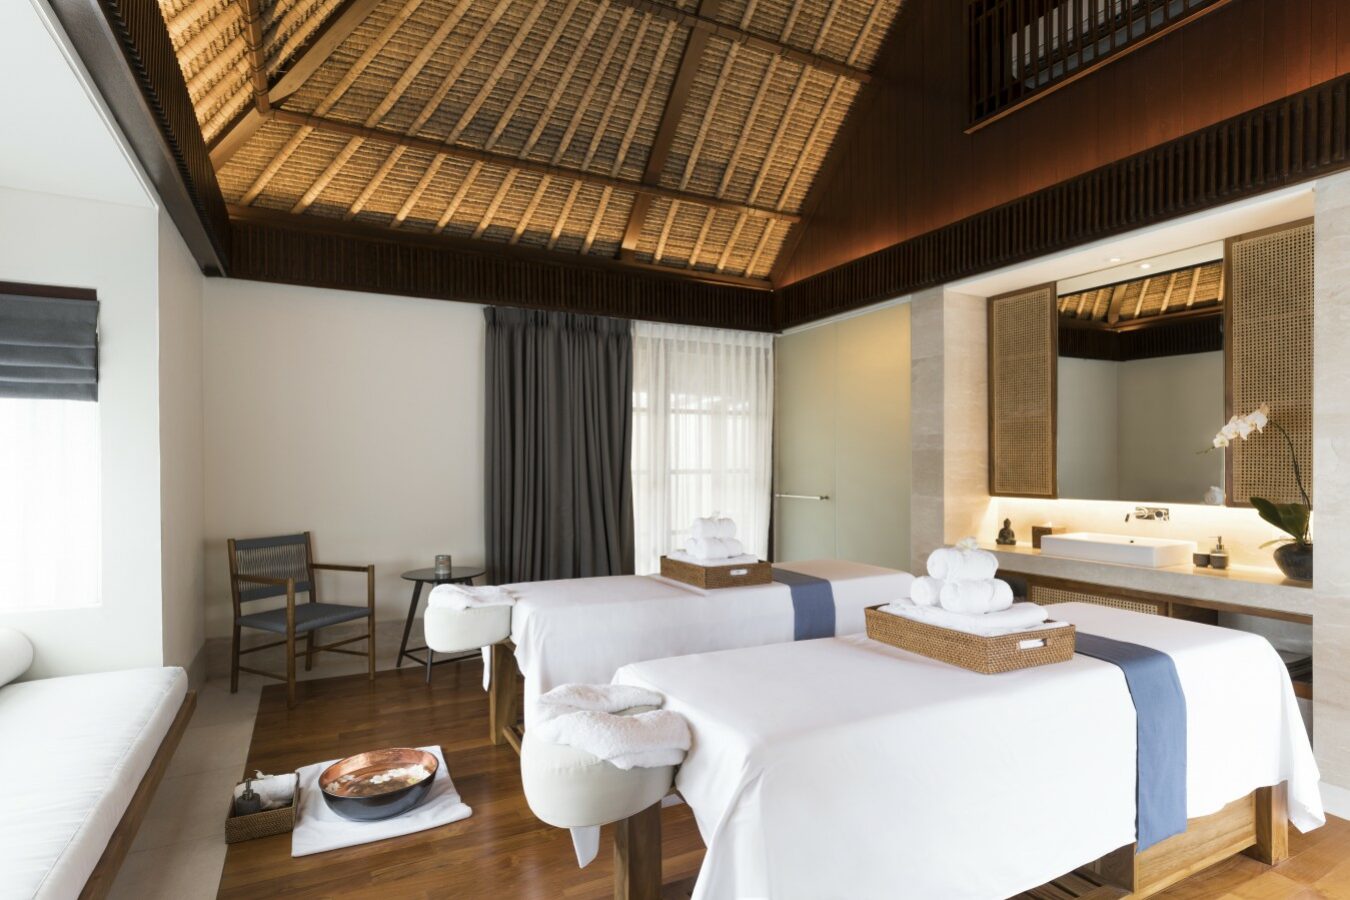 Review - We Check in to REVĪVŌ Wellness Resort, Bali